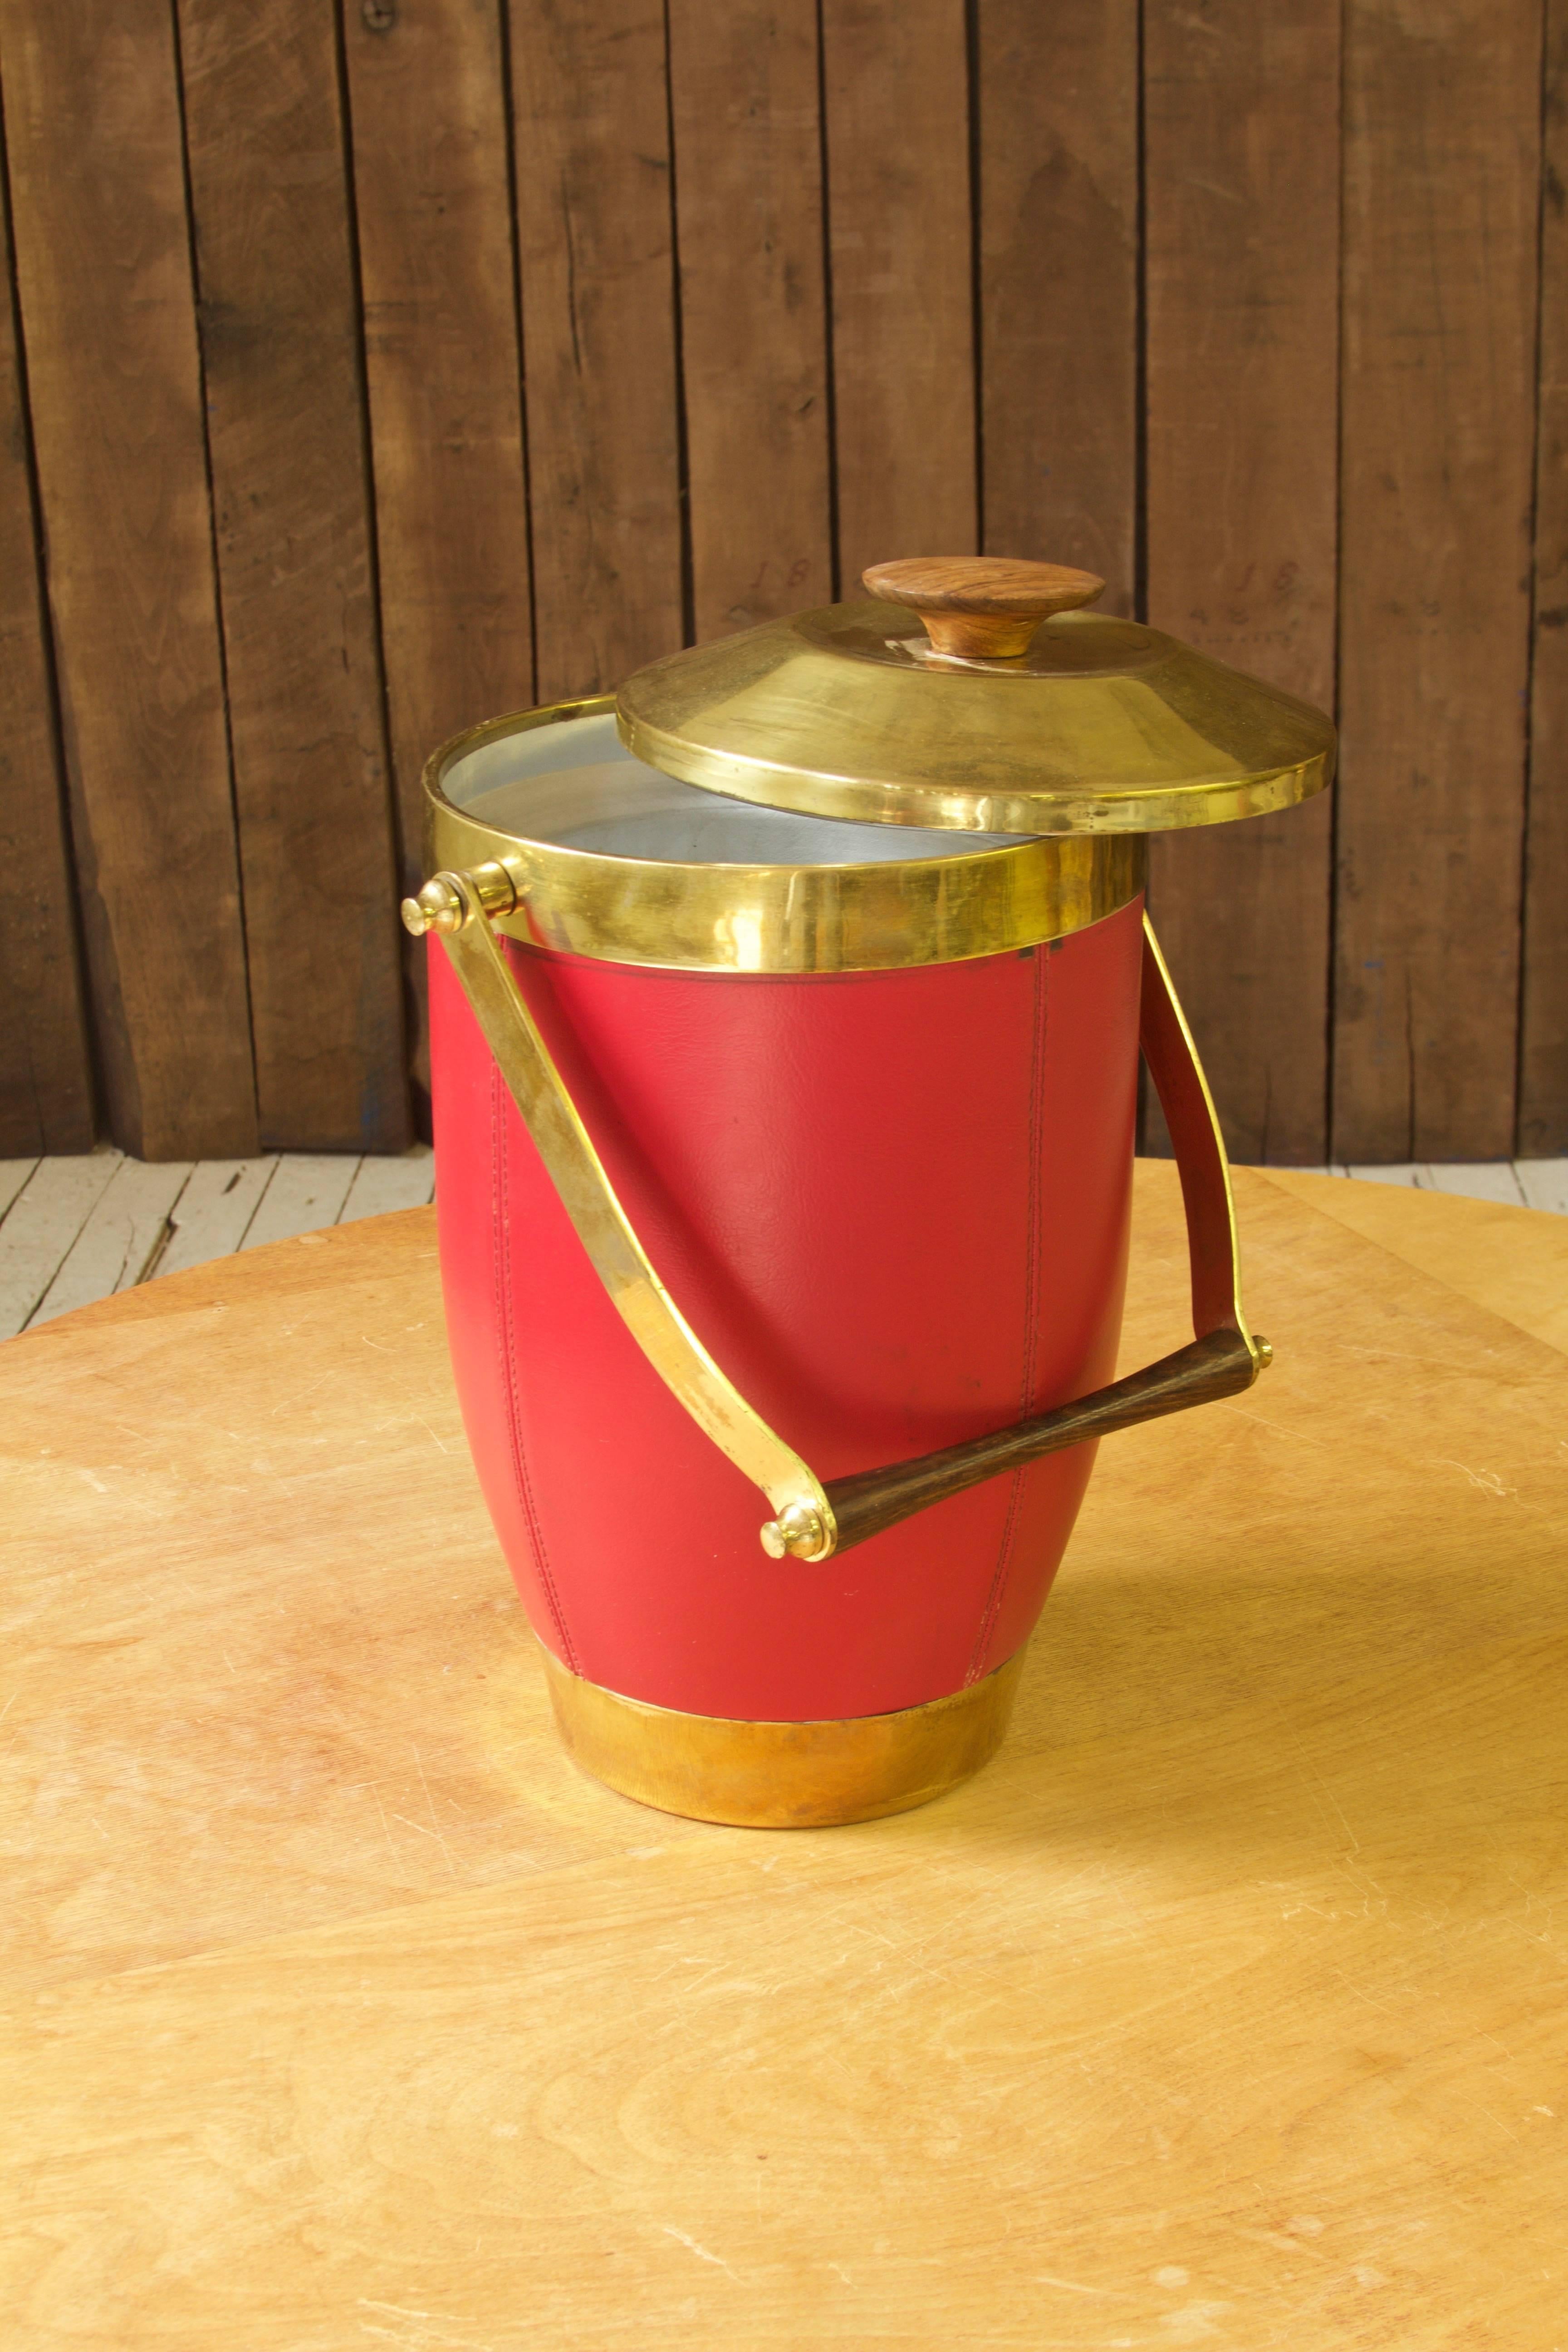 Double-chamber insulated ice-bucket featuring tempered aluminum chambers, brass accents, and Brazilian Rosewood handles. Made in Italy, circa 1970.